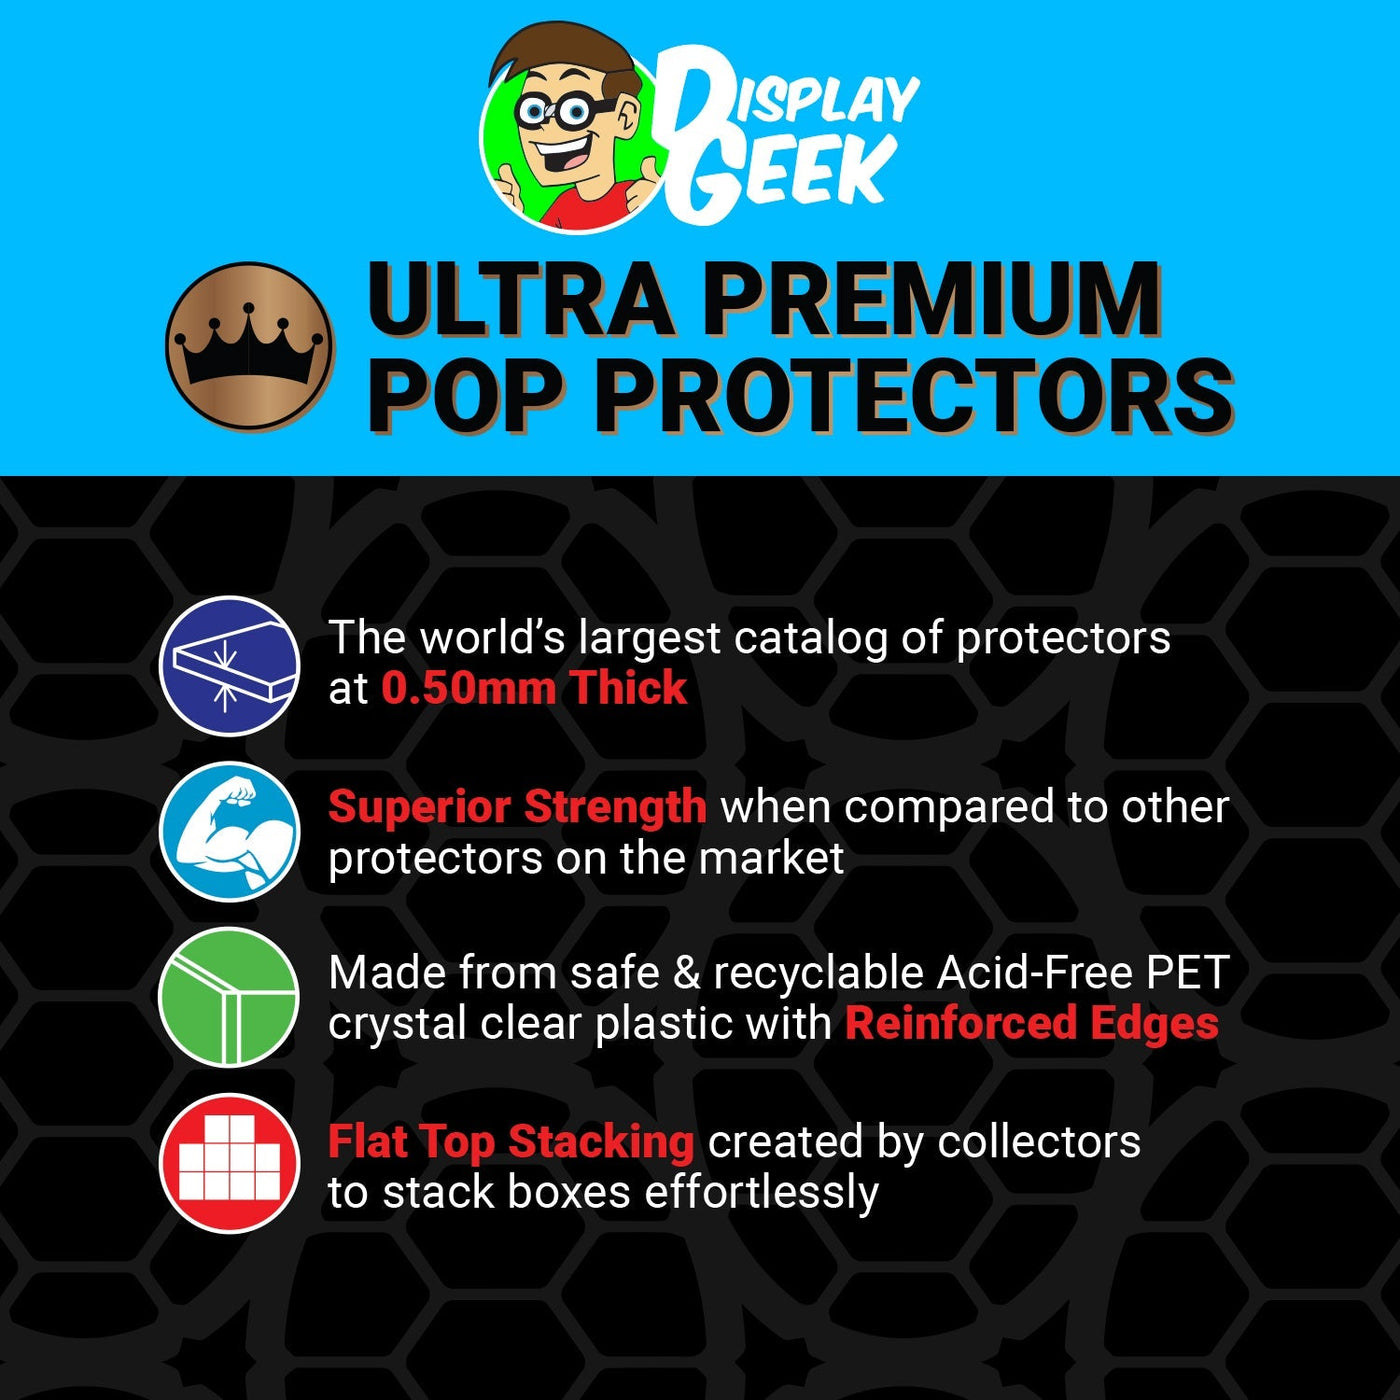 Pop Protector for Cling Funko Pop Pez on The Protector Guide App by Display Geek